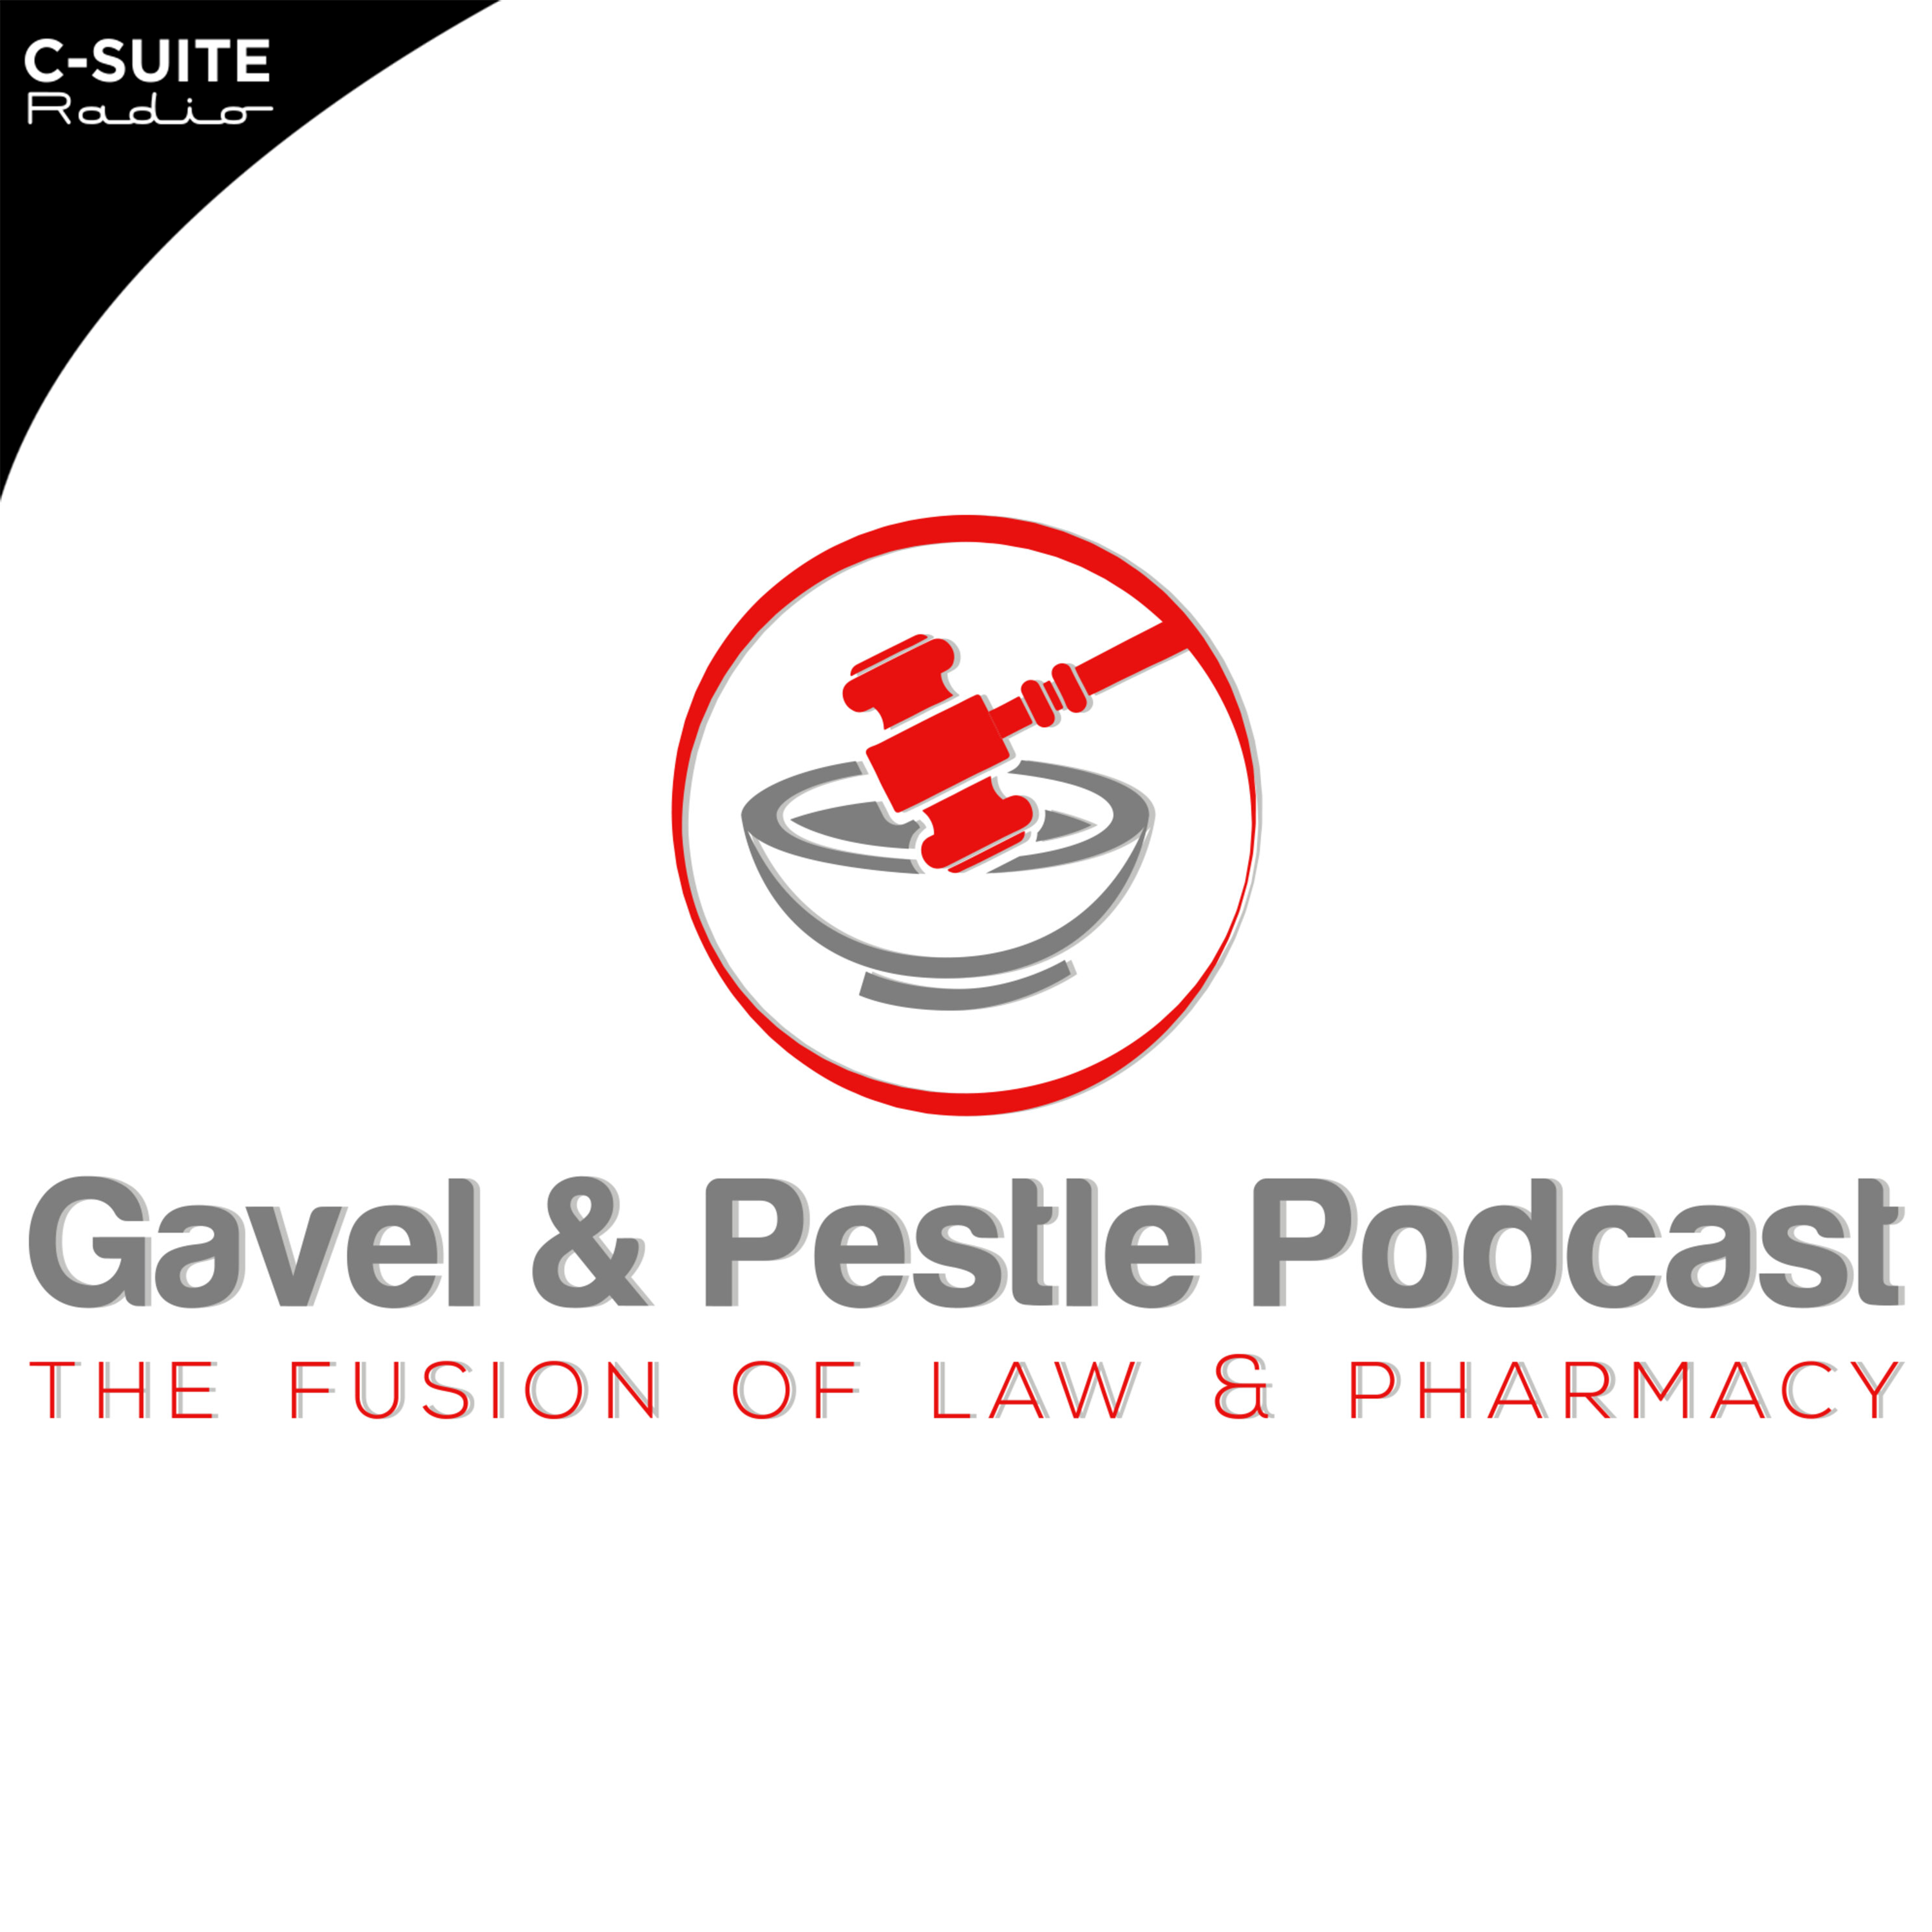 Gavel and Pestle Podcast